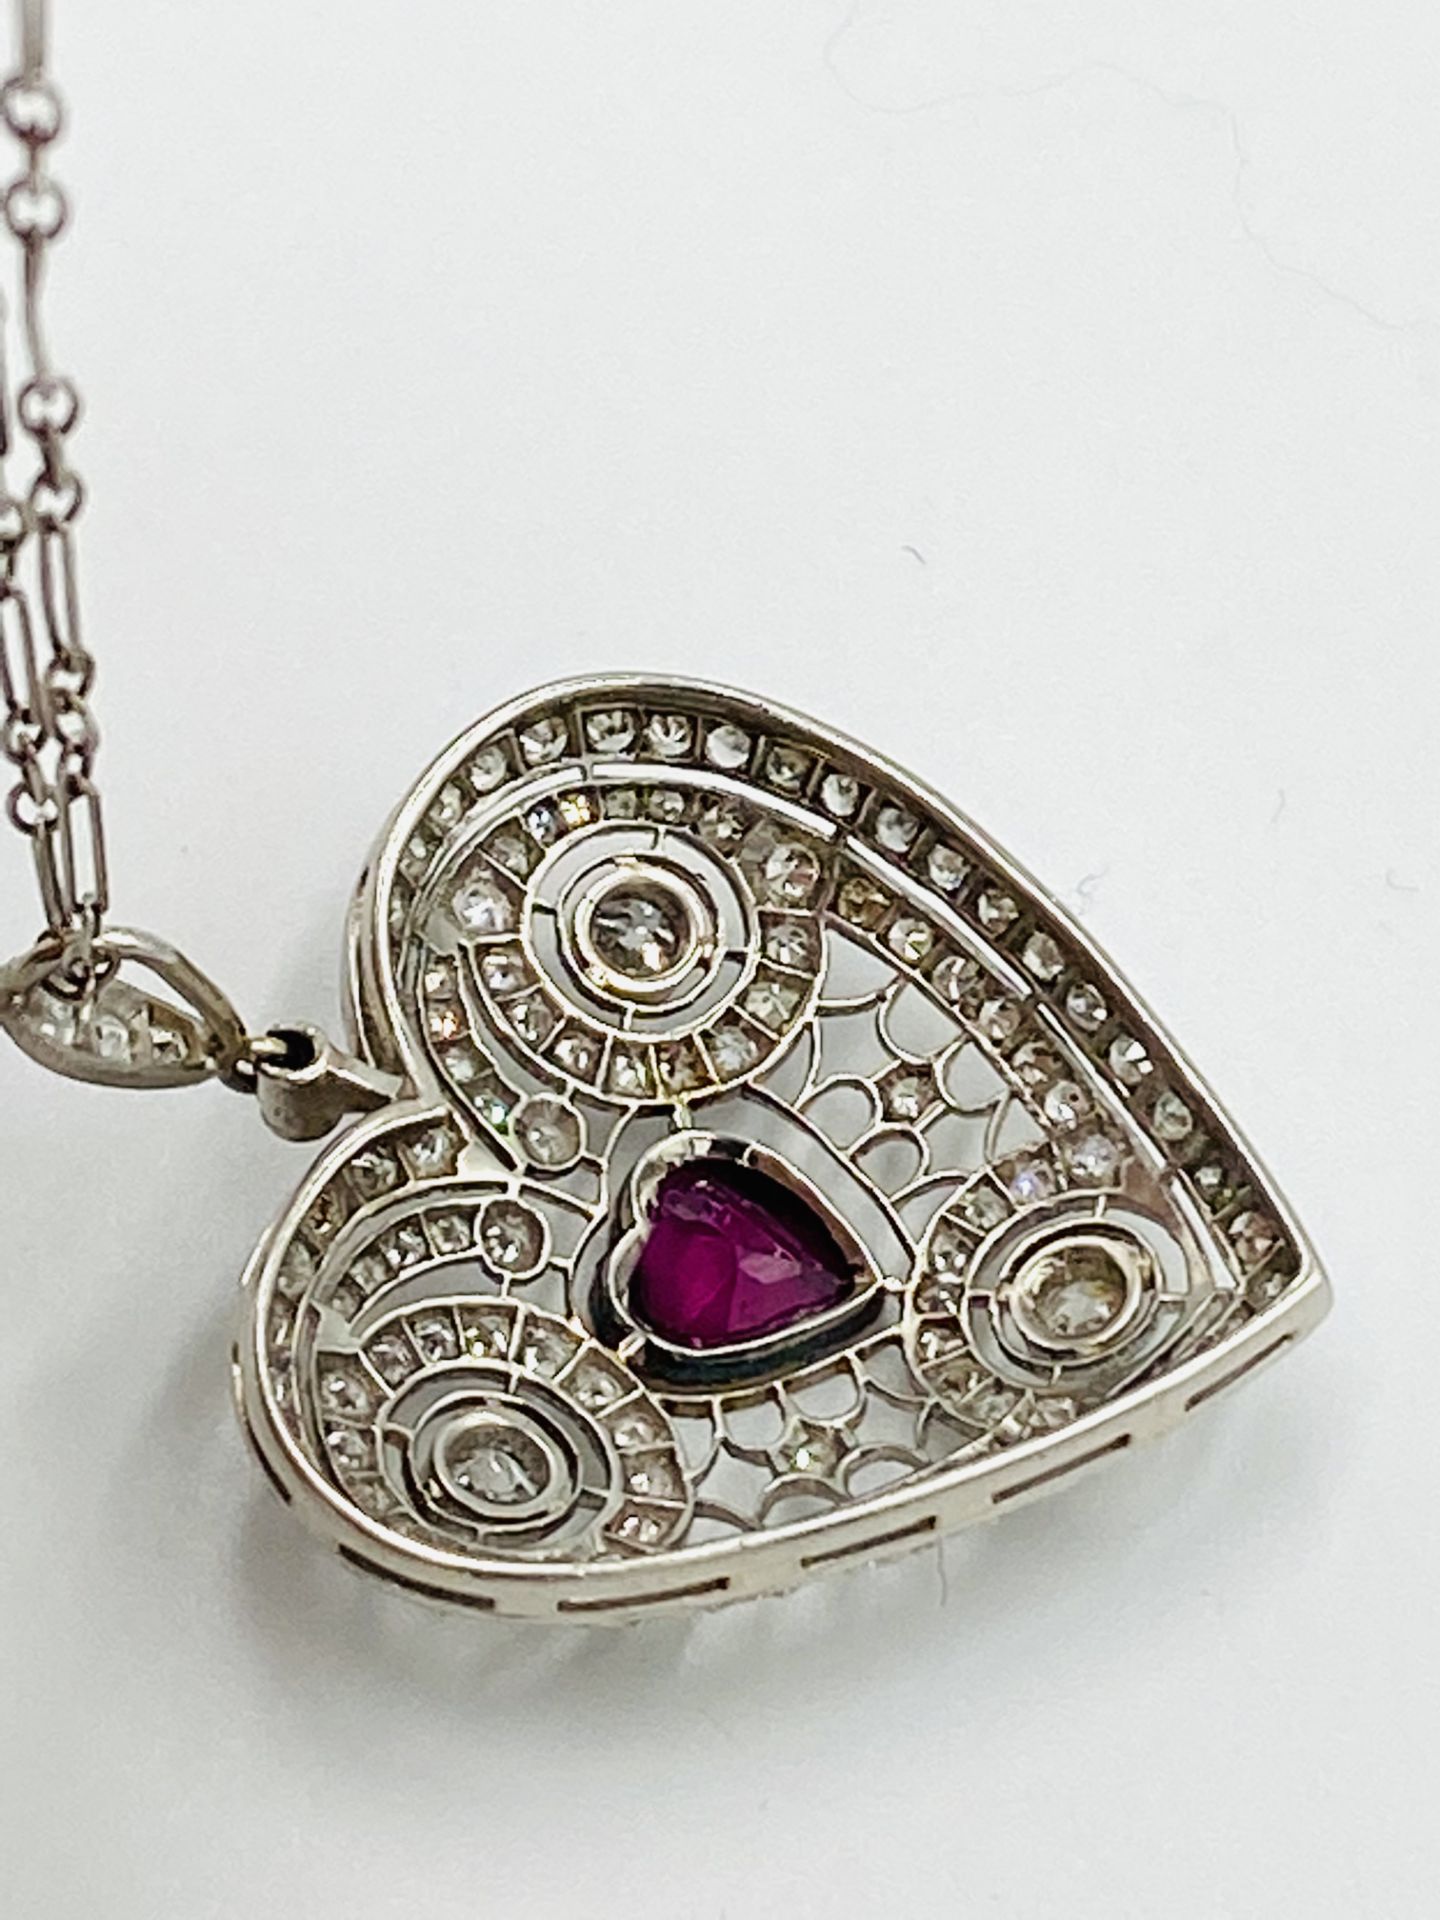 Edwardian white gold, ruby and diamond heart pendant with chain - Image 3 of 5